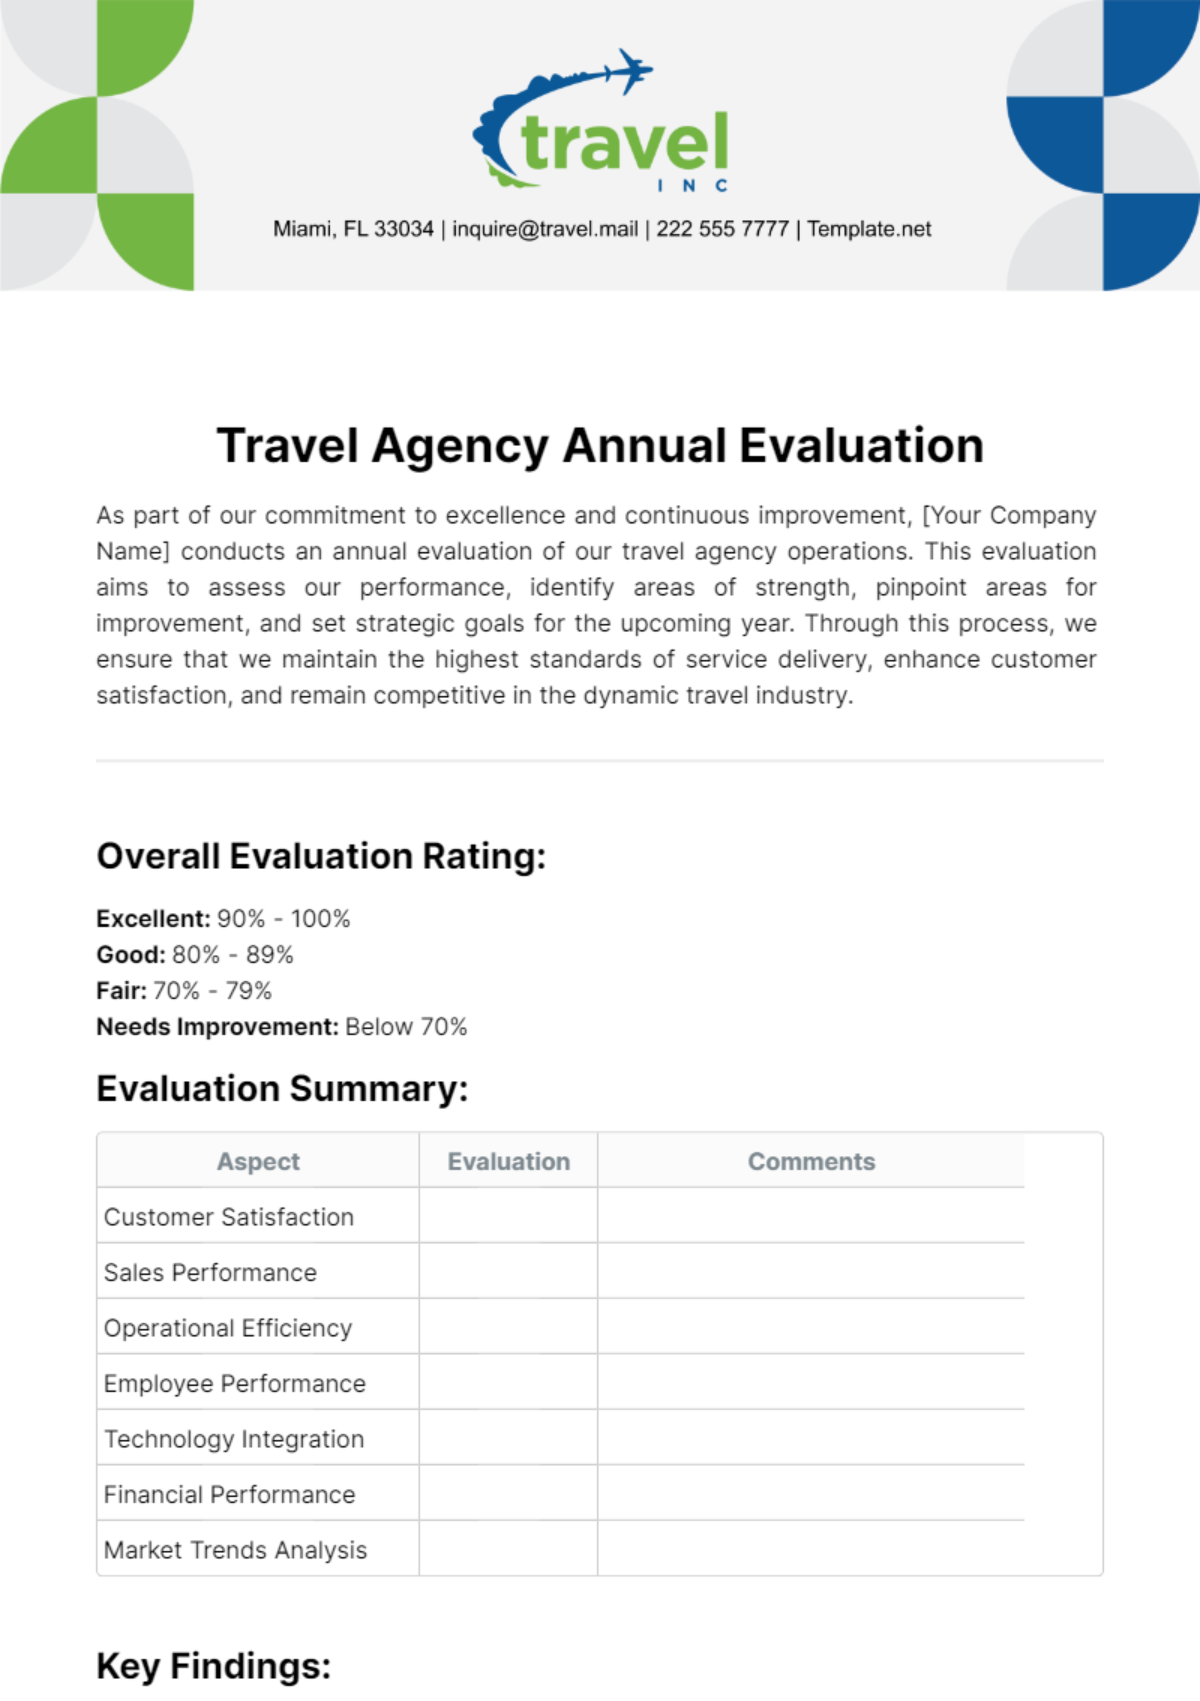 Travel Agency Annual Evaluation Template